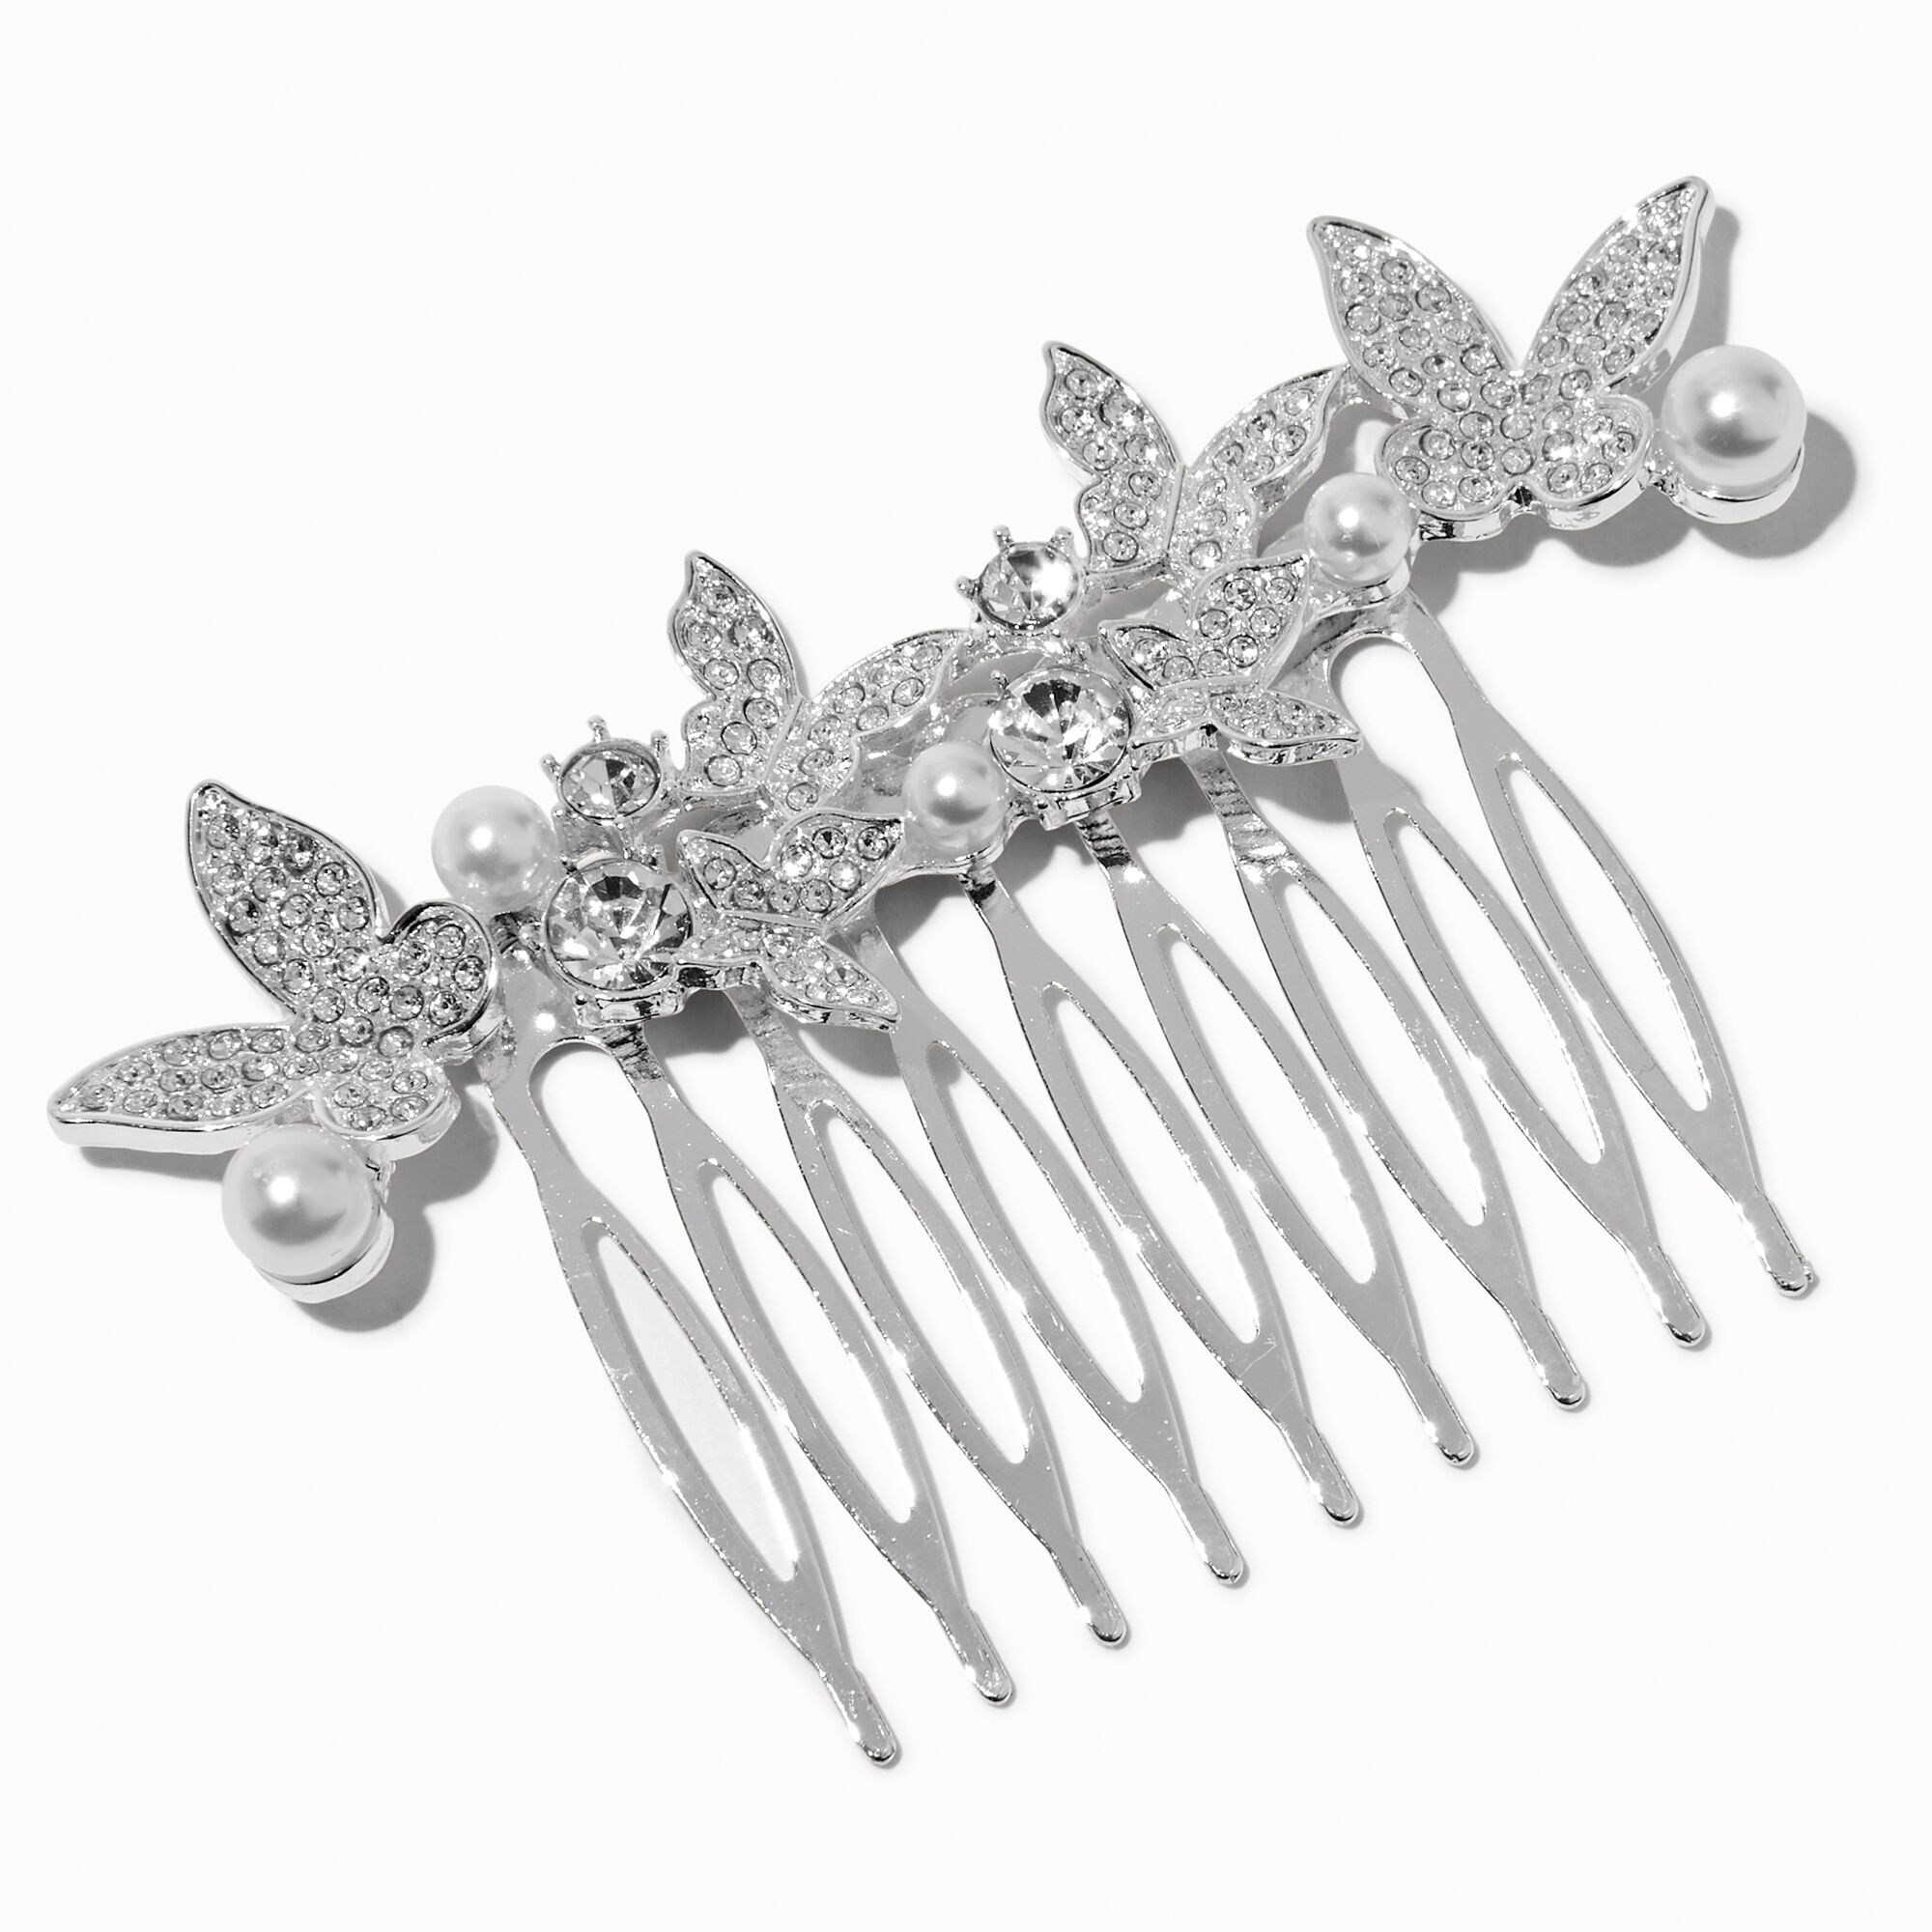 View Claires Crystal Butterfly Pearl Hair Comb Silver information